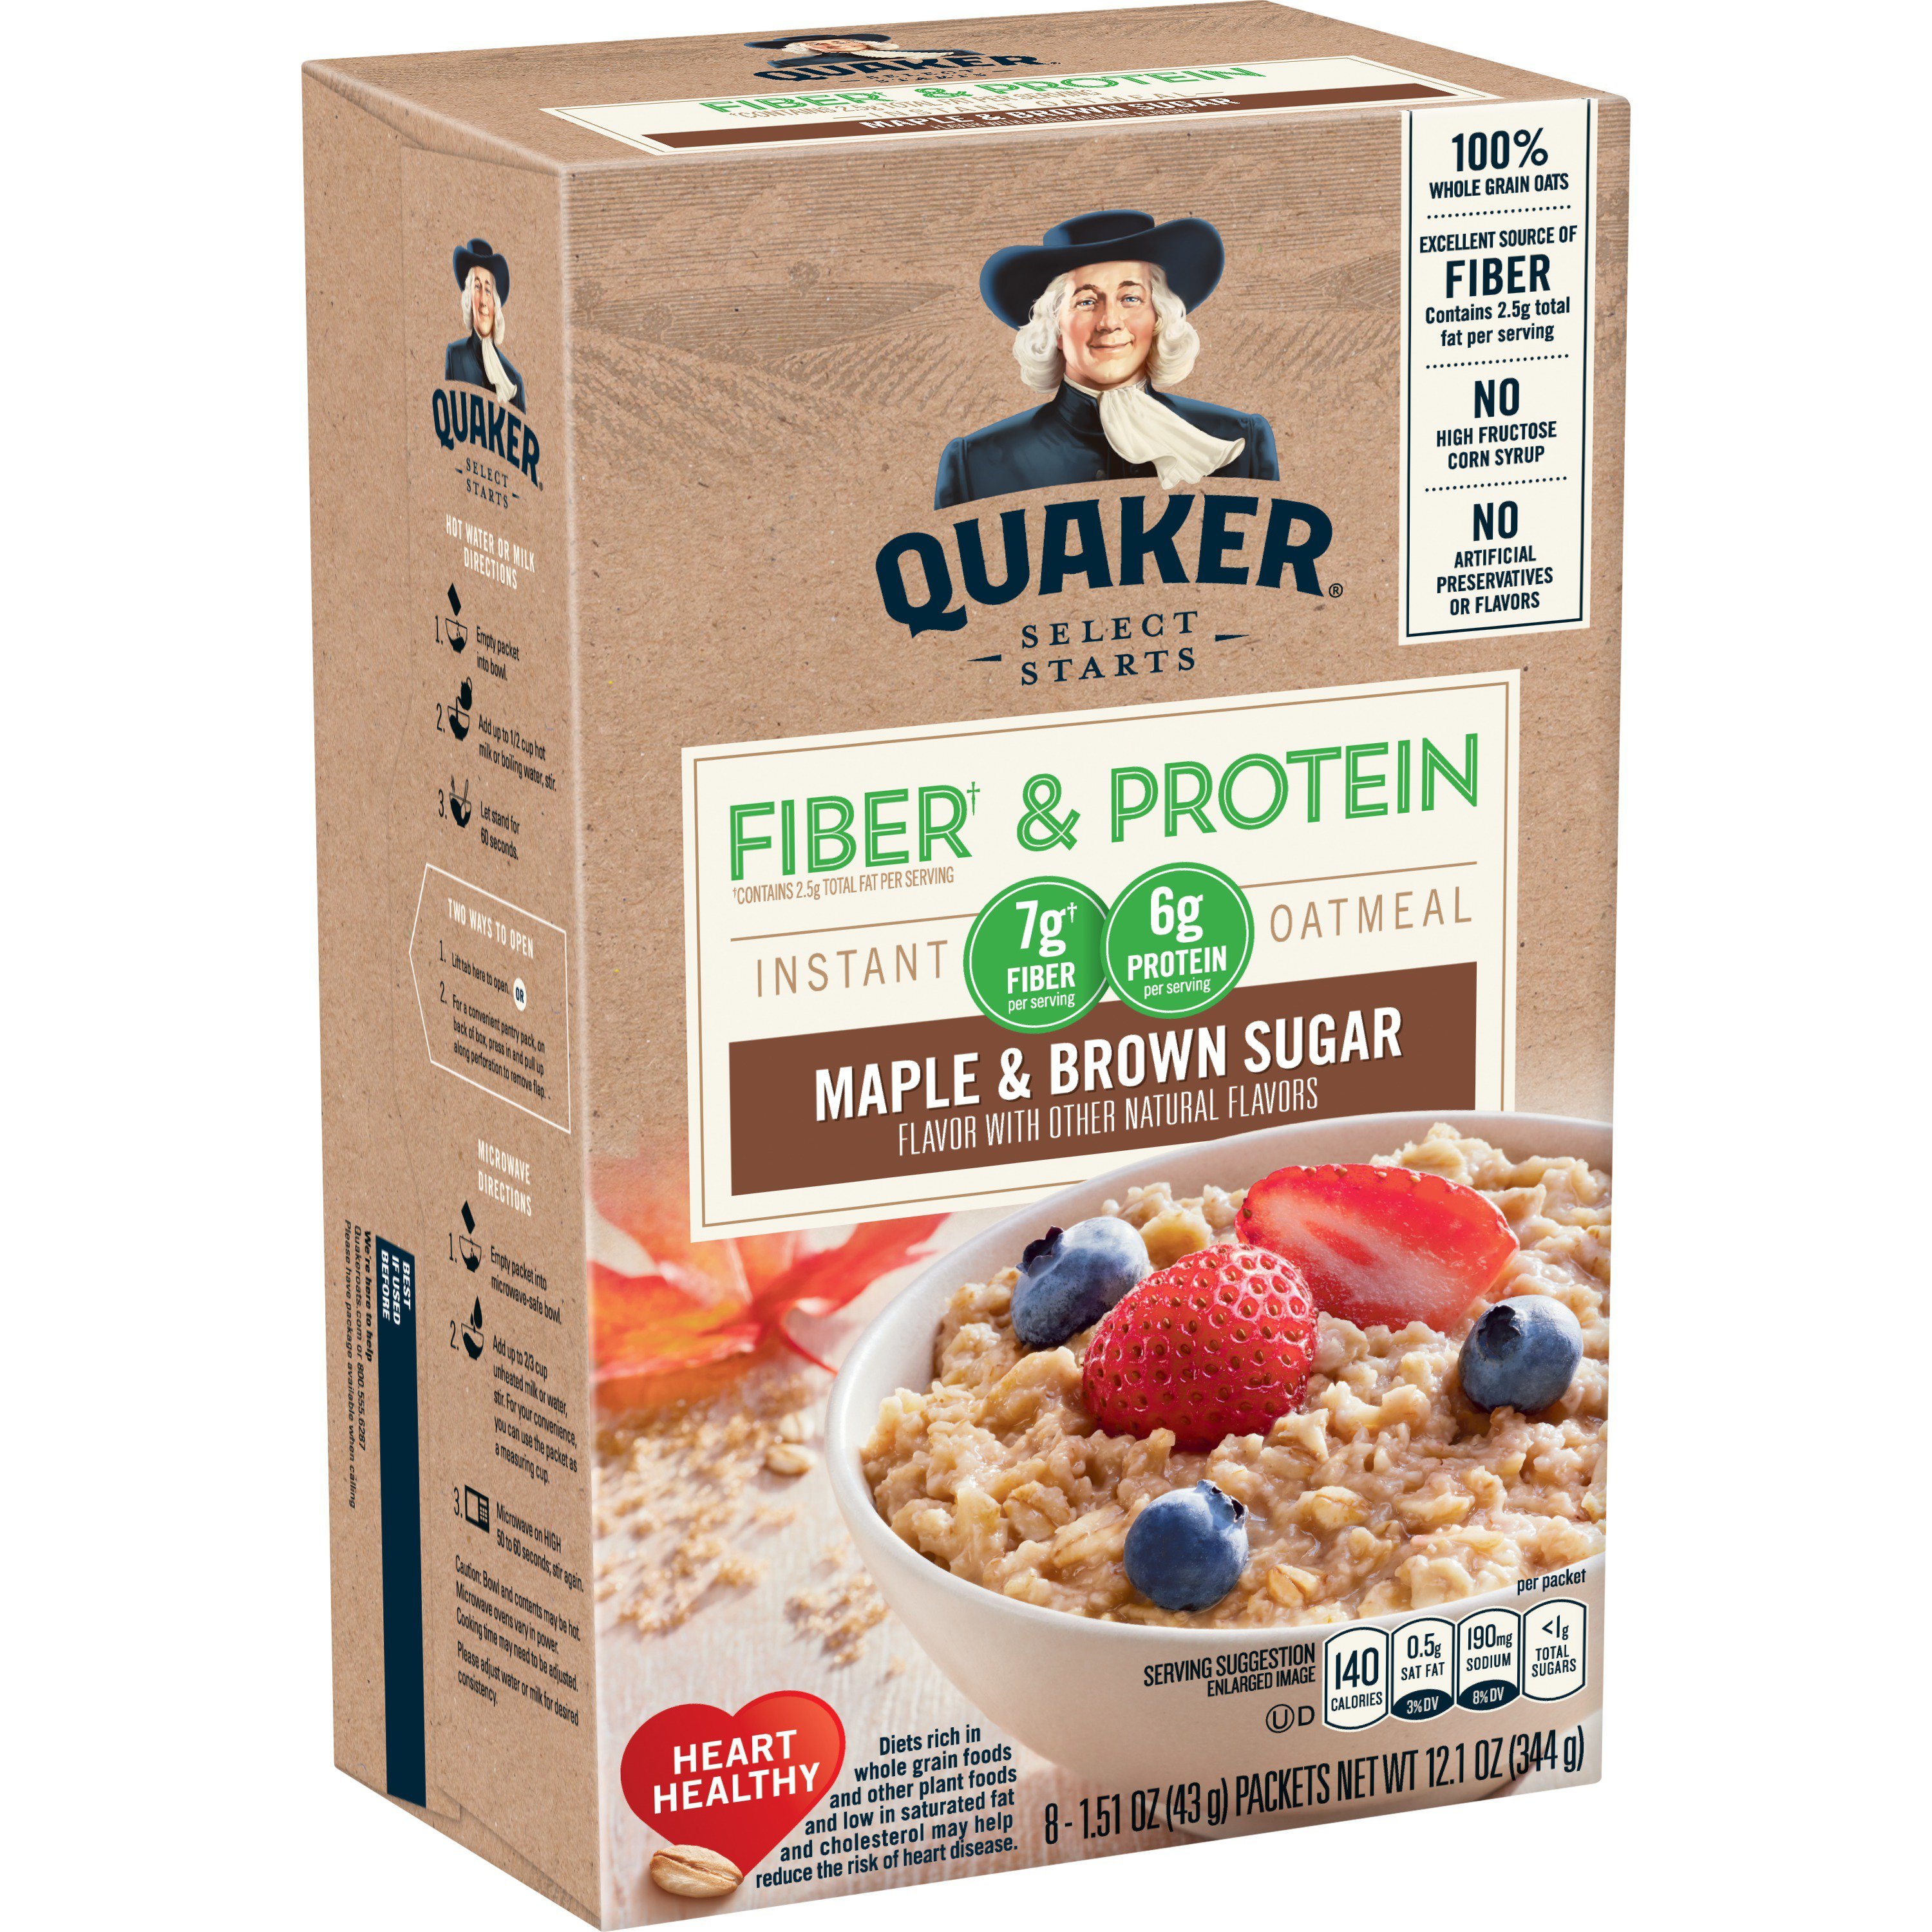 Quaker Select Starts Maple & Brown Sugar Instant Oatmeal ...